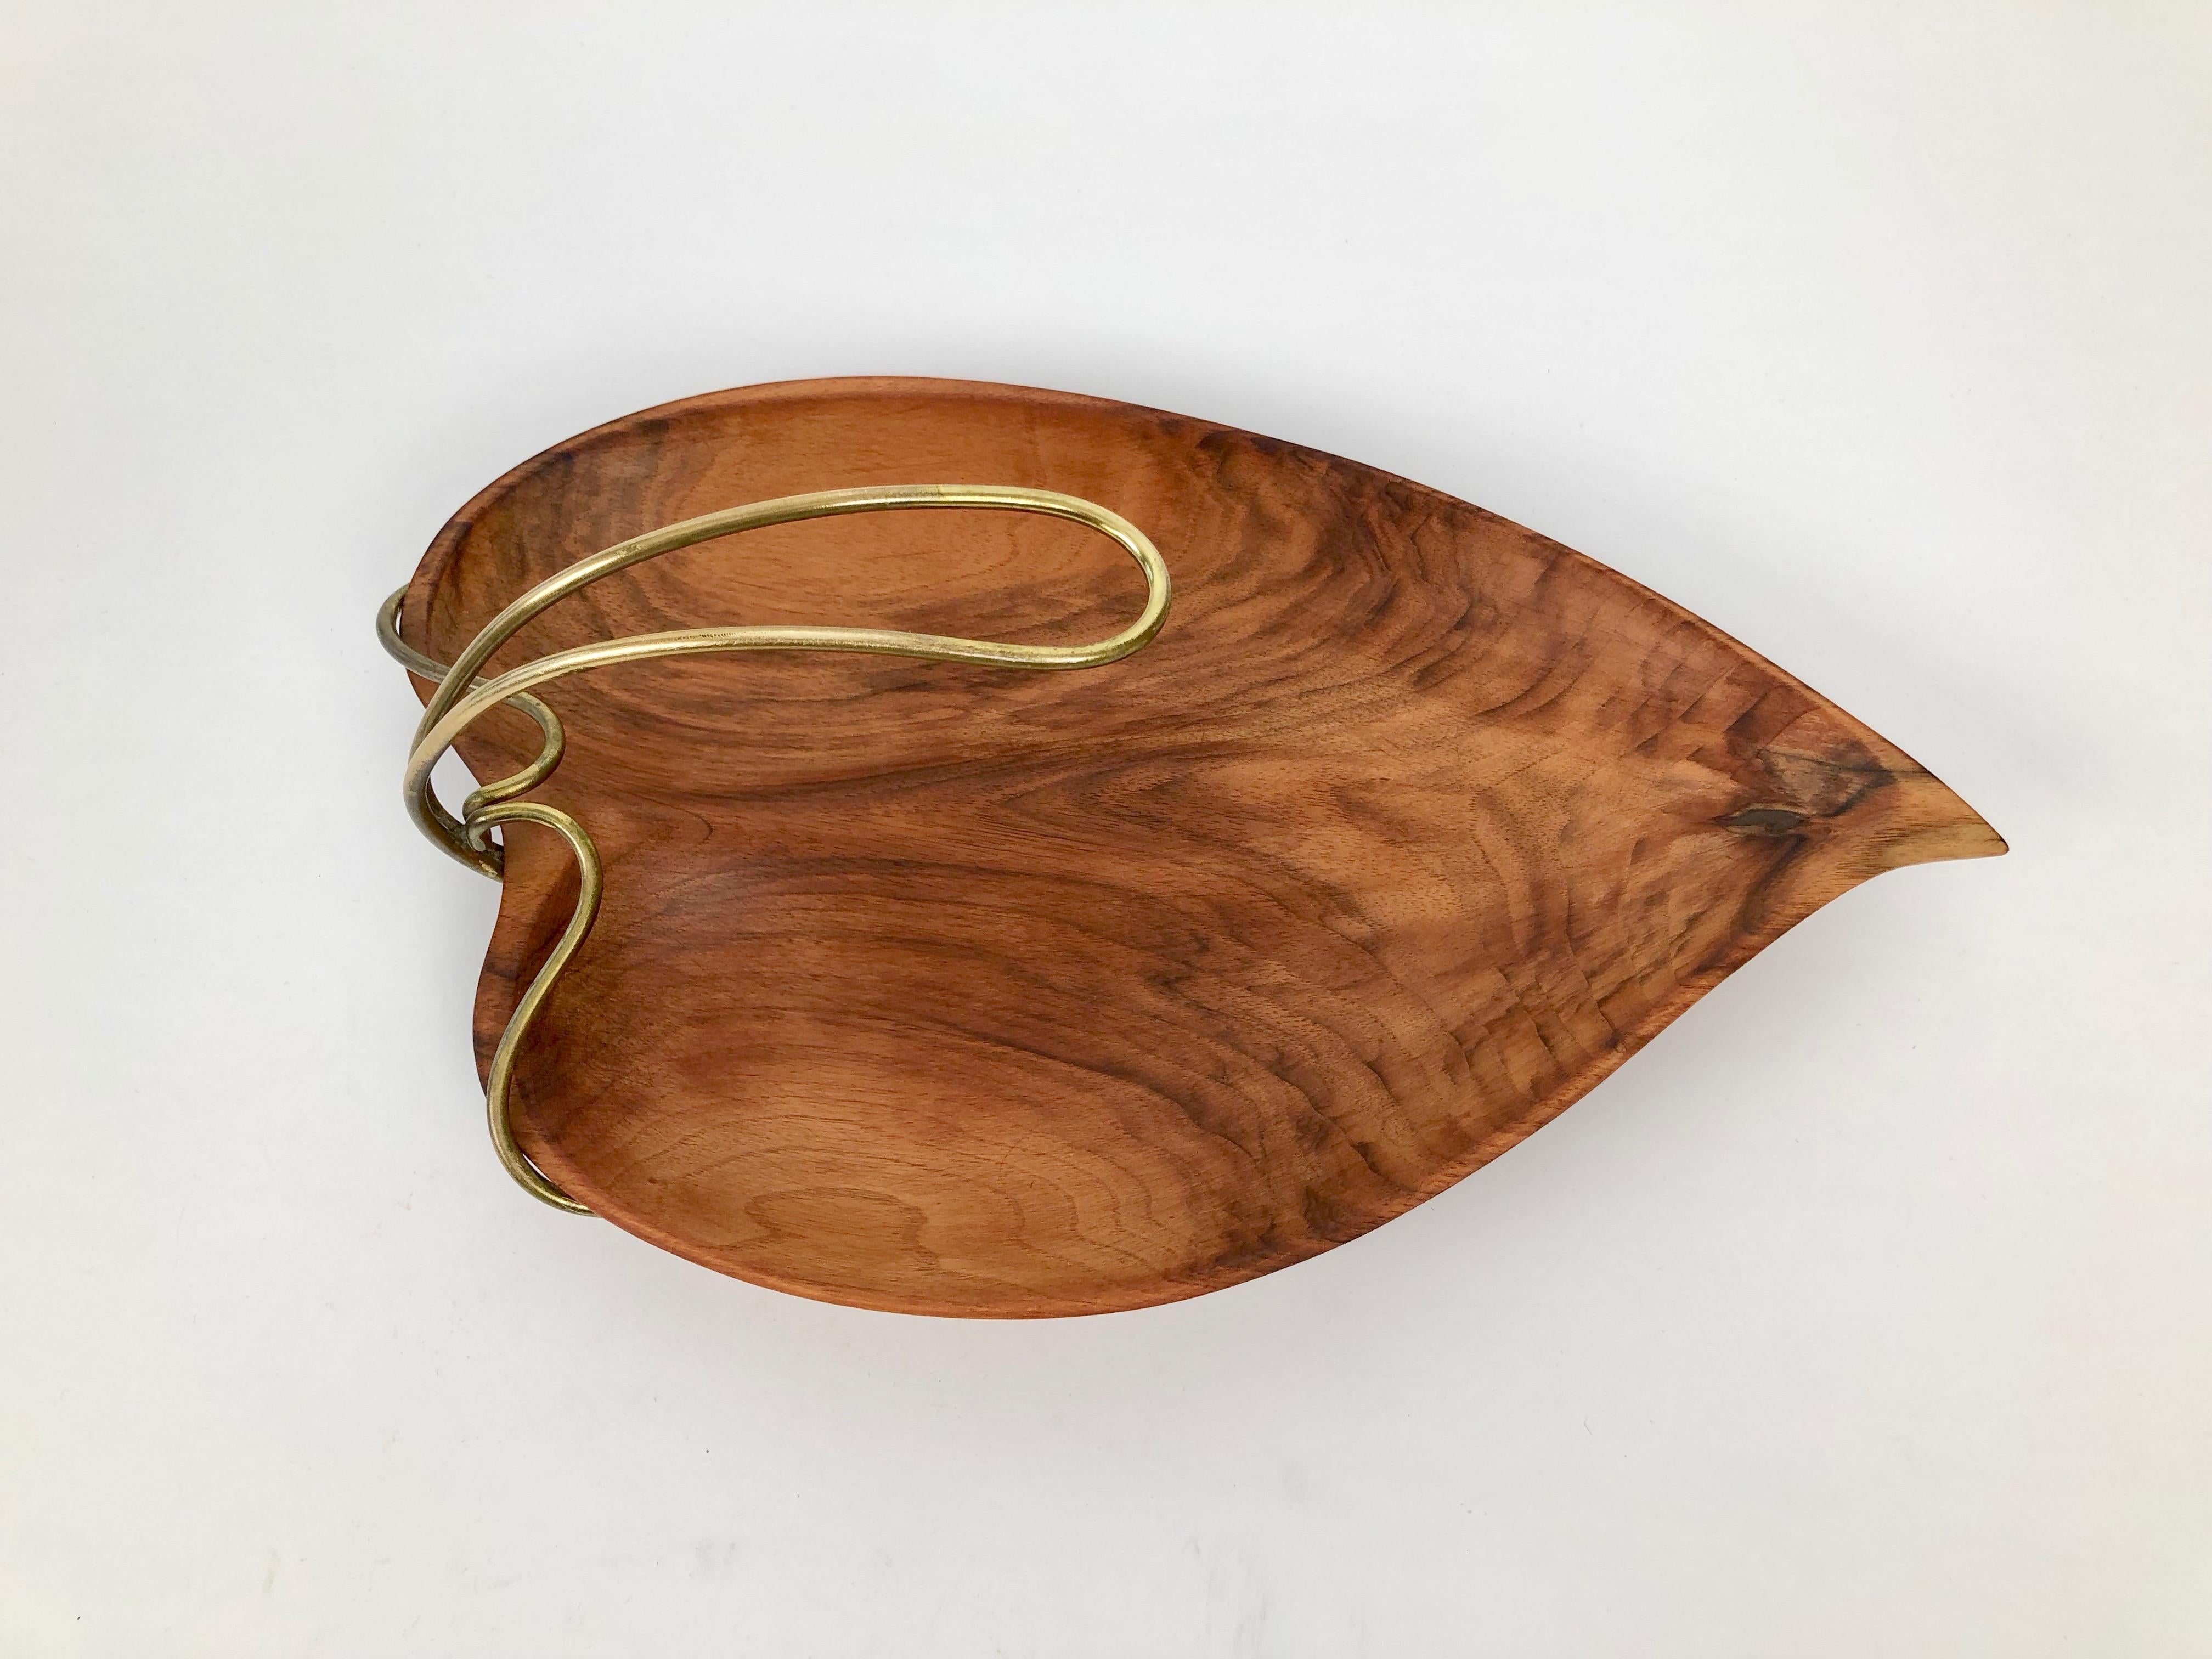 This is a beautiful, hand carved wooden bowl in the shape of a leaf. You have to see it in person to appreciate its elegance. Holding it in the hand and feeling the silky smoothness of the polished walnut is a sensation.

The original oil finish